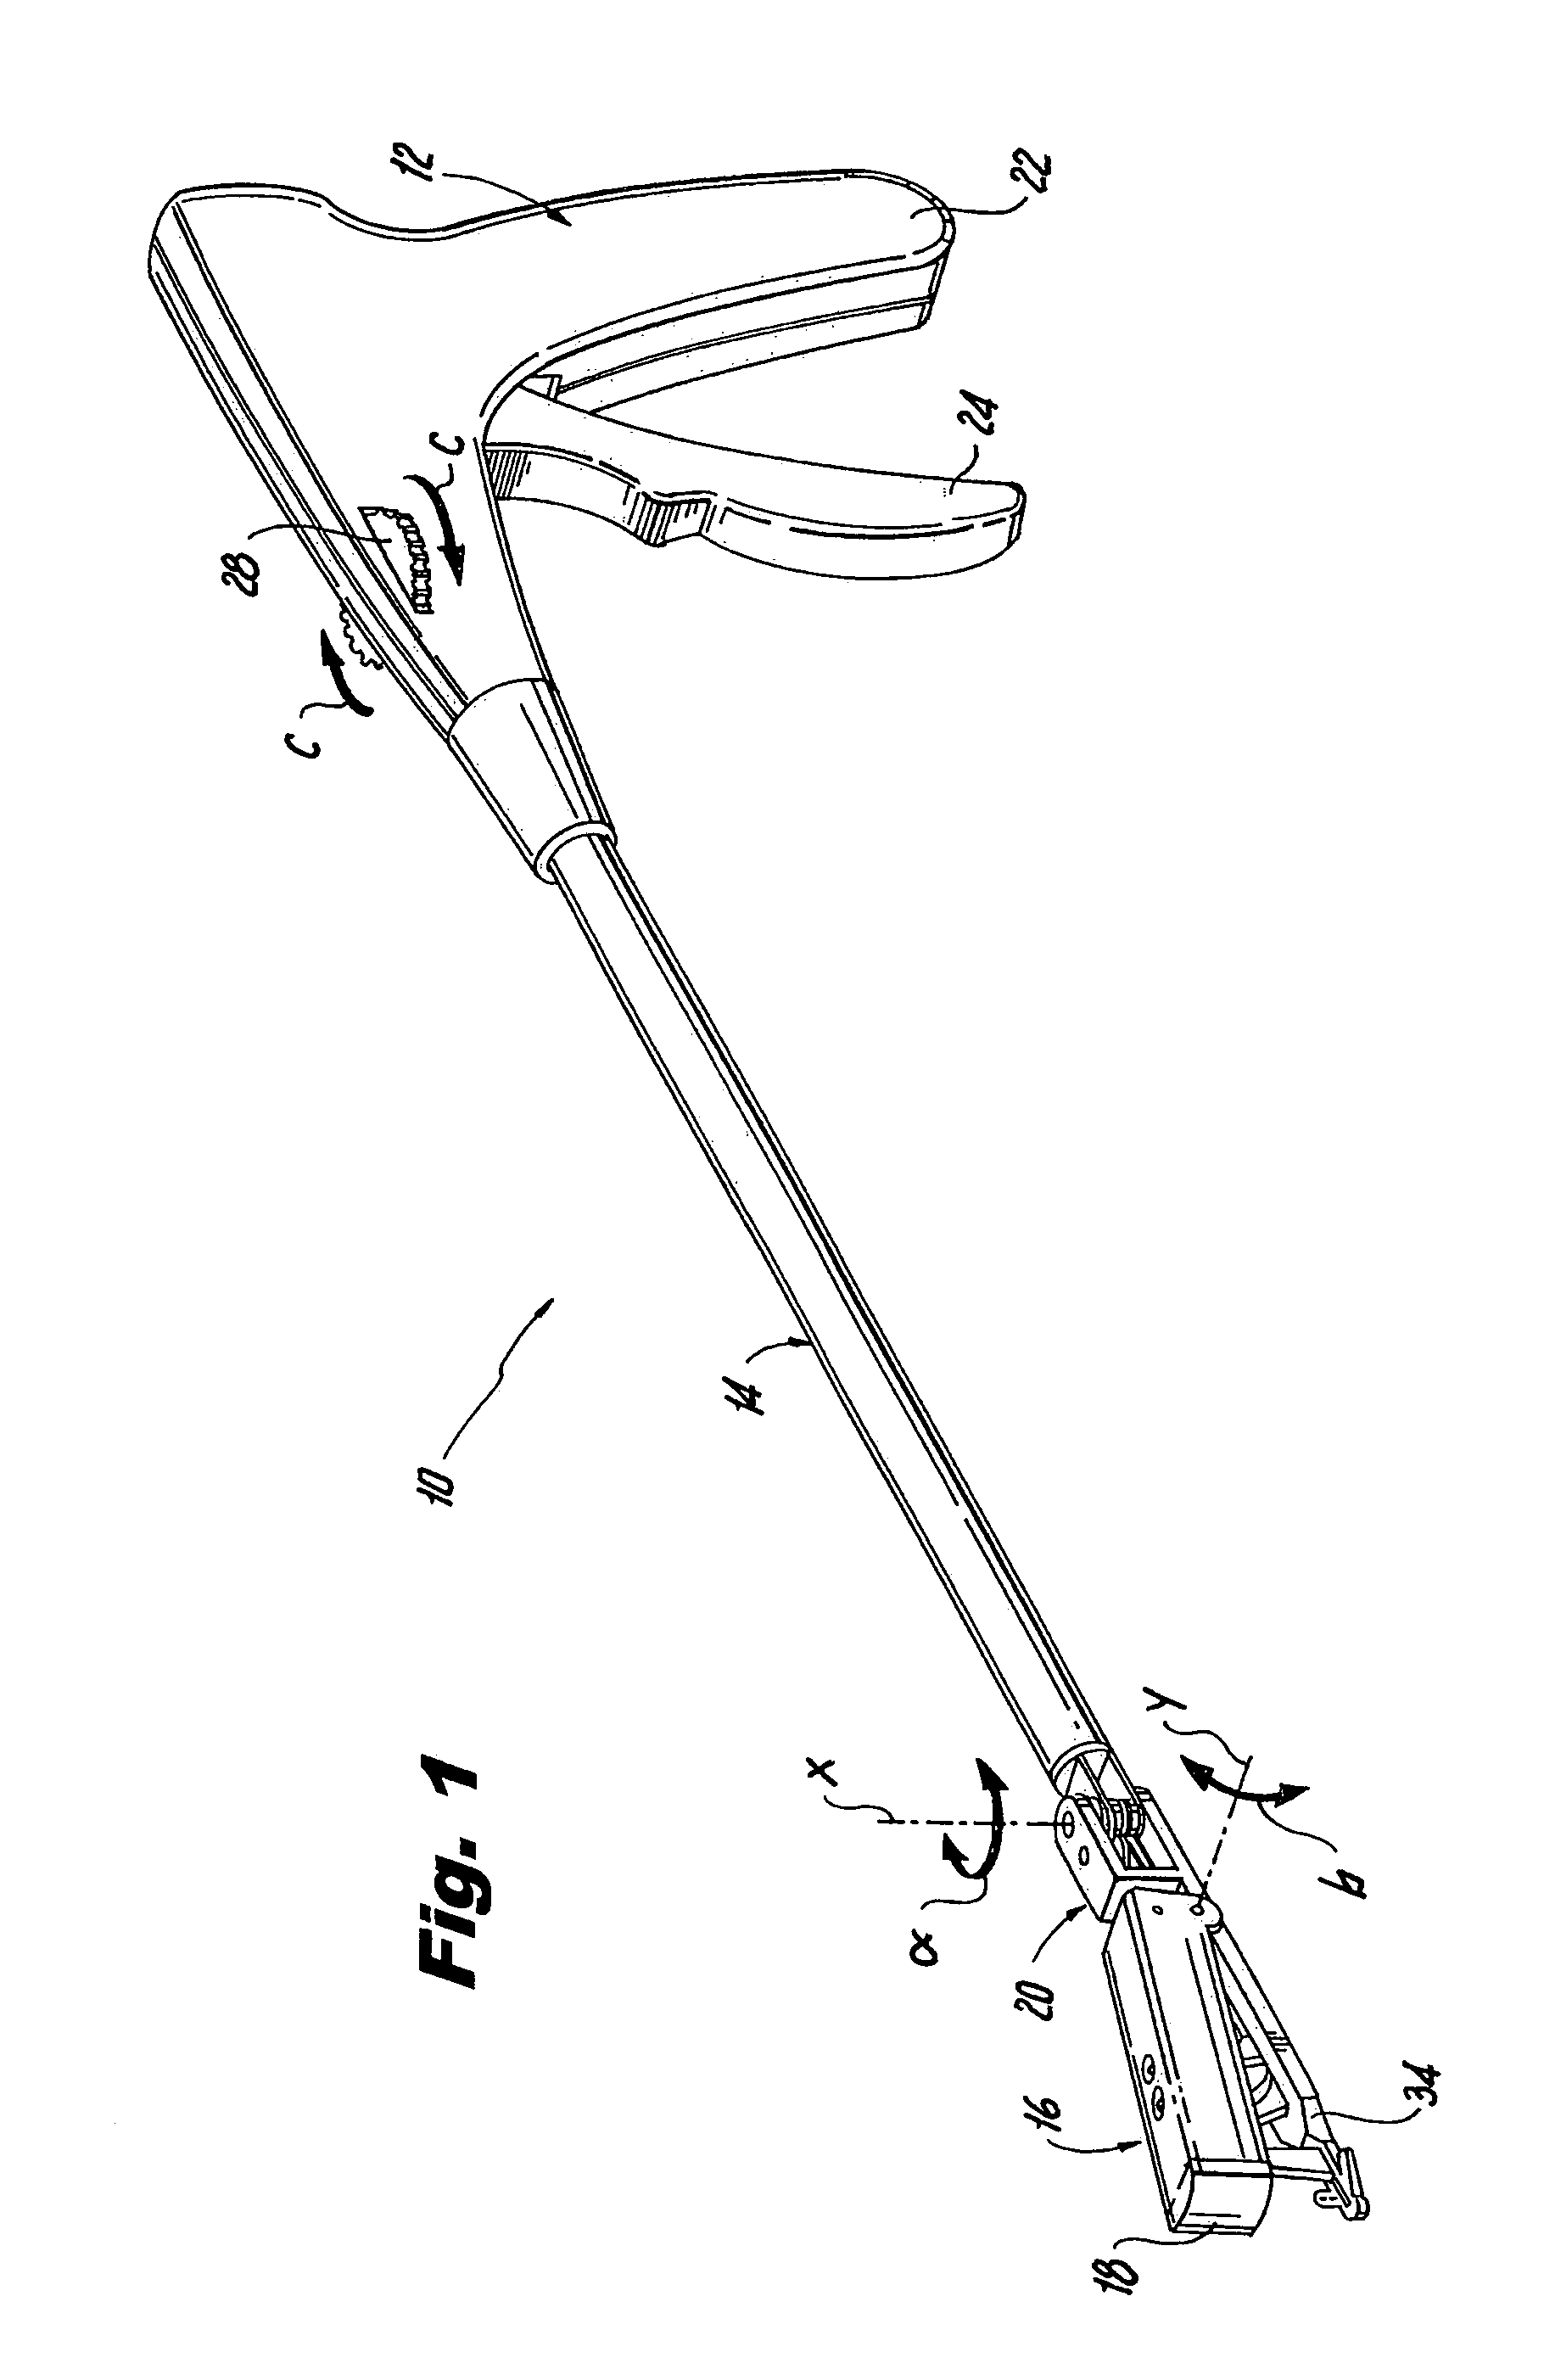 Surgical instrument for progressively stapling and incising tissue